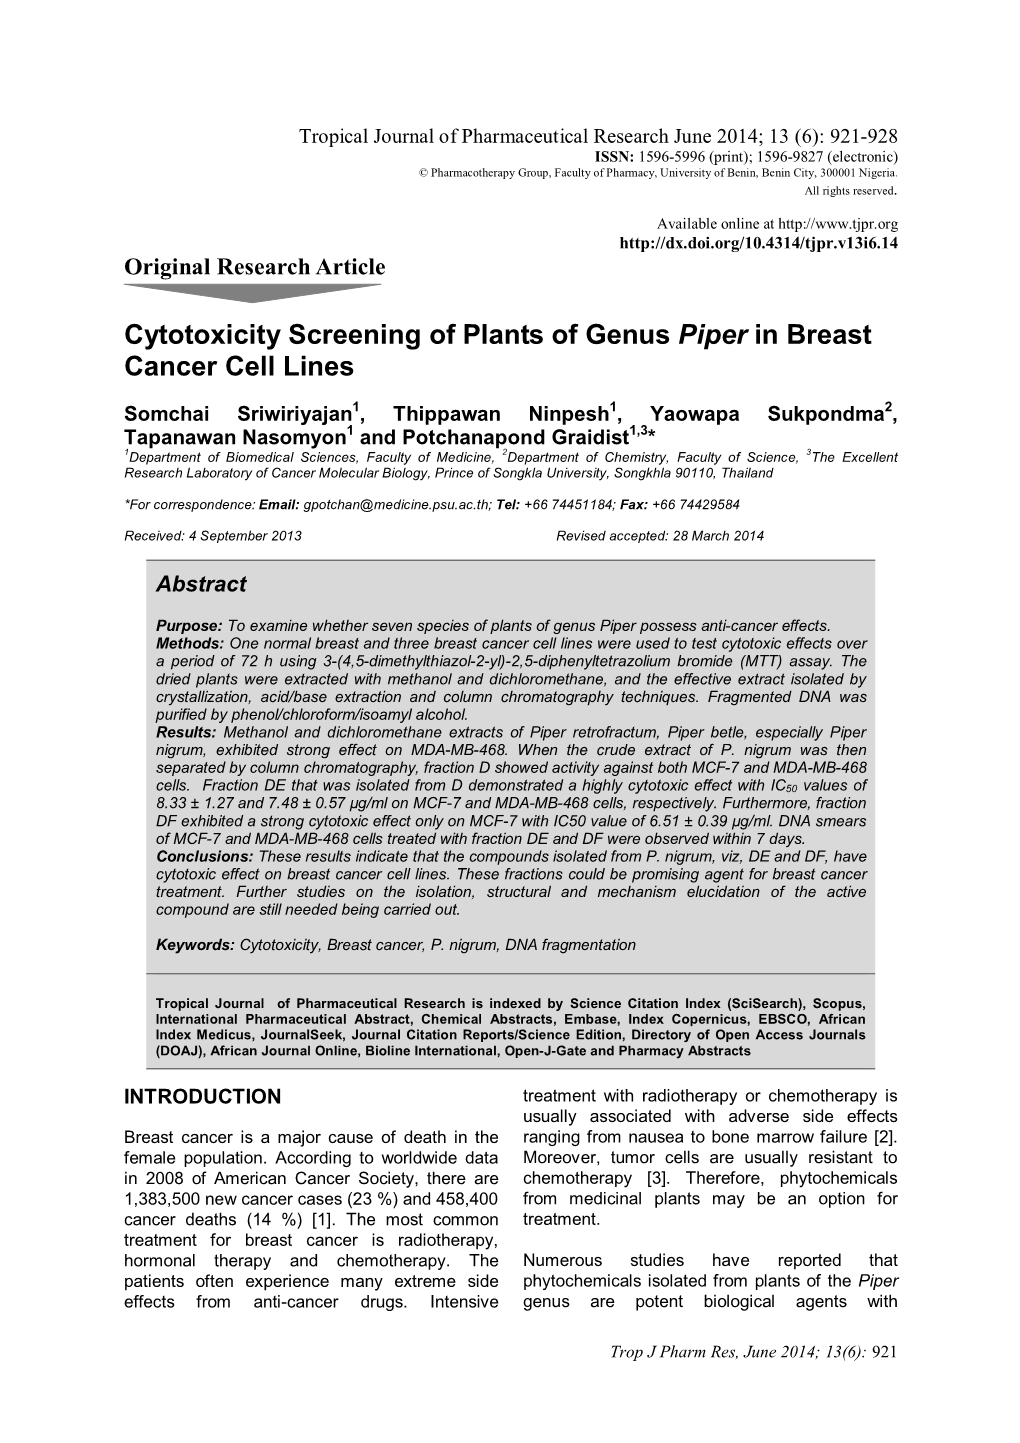 Cytotoxicity Screening of Plants of Genus Piper in Breast Cancer Cell Lines